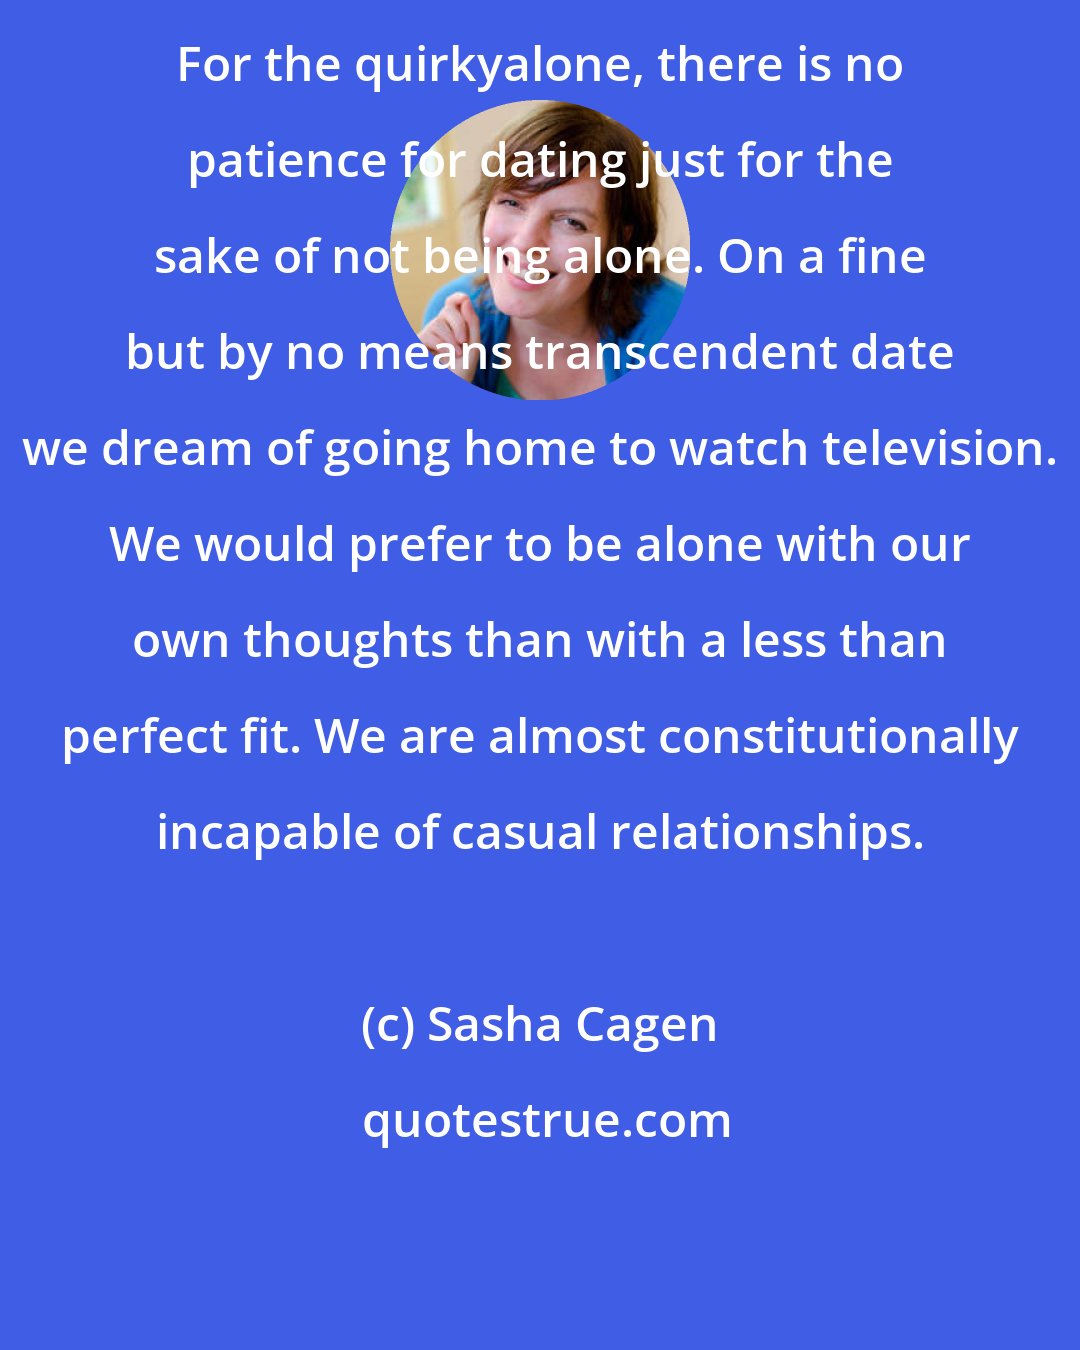 Sasha Cagen: For the quirkyalone, there is no patience for dating just for the sake of not being alone. On a fine but by no means transcendent date we dream of going home to watch television. We would prefer to be alone with our own thoughts than with a less than perfect fit. We are almost constitutionally incapable of casual relationships.